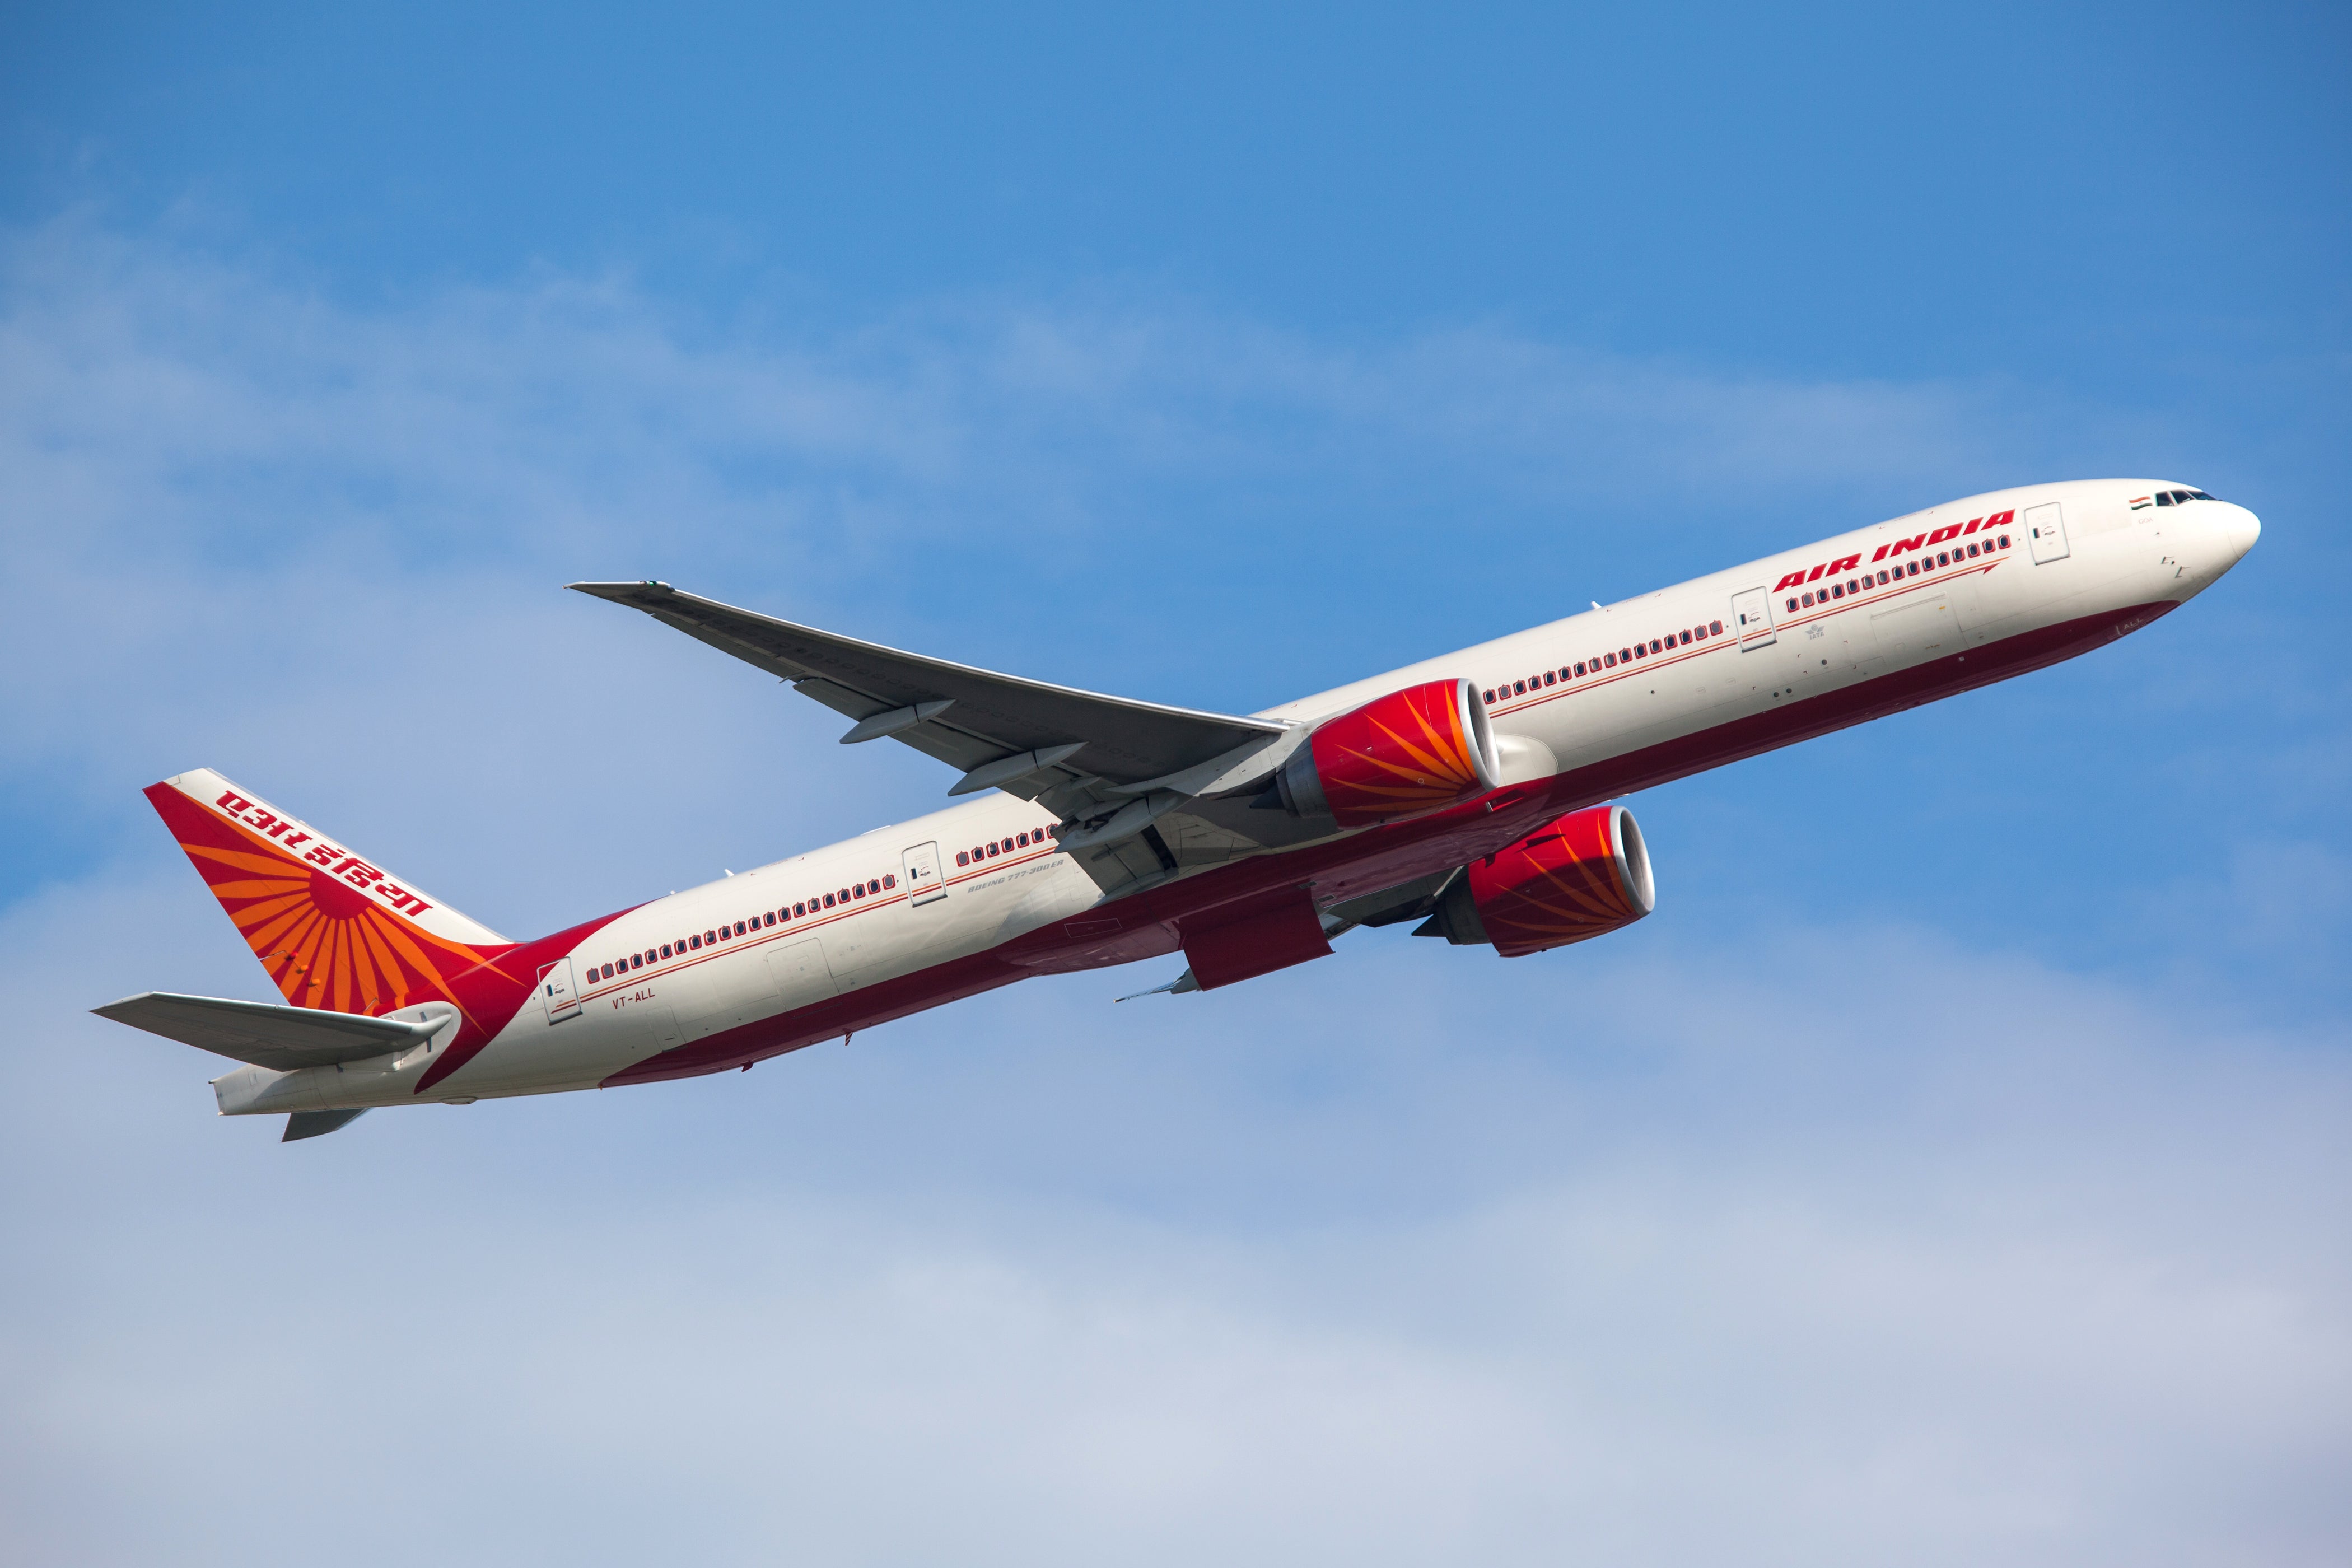 The Air India Boeing 777-300ER was fumigated and passengers put on another aircraft